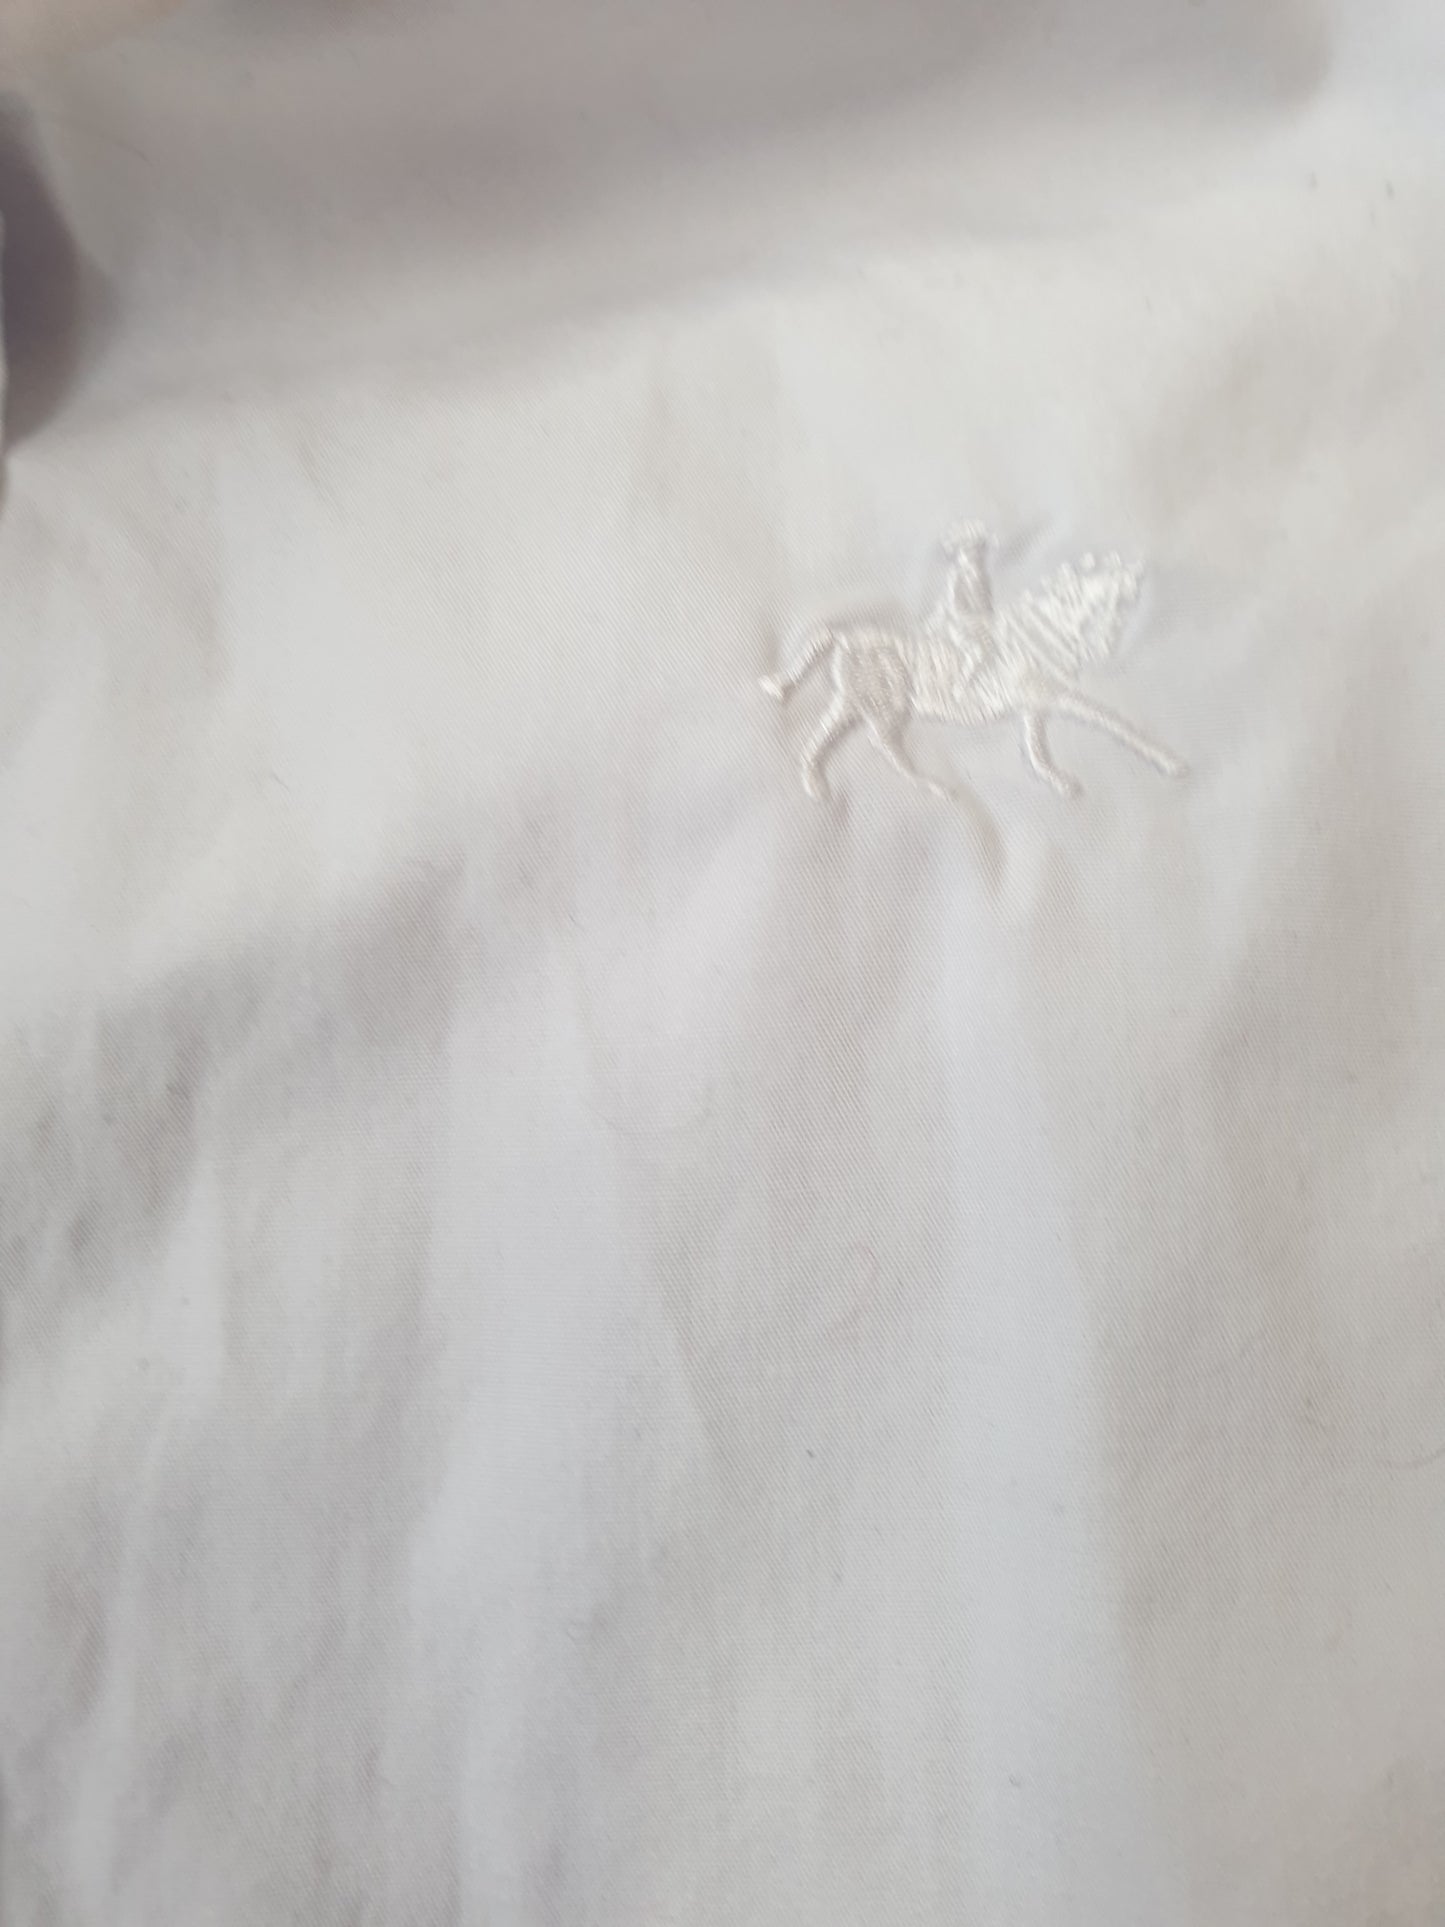 Used size 8 Le Beau Cheval white shirt FREE POSTAGE☆